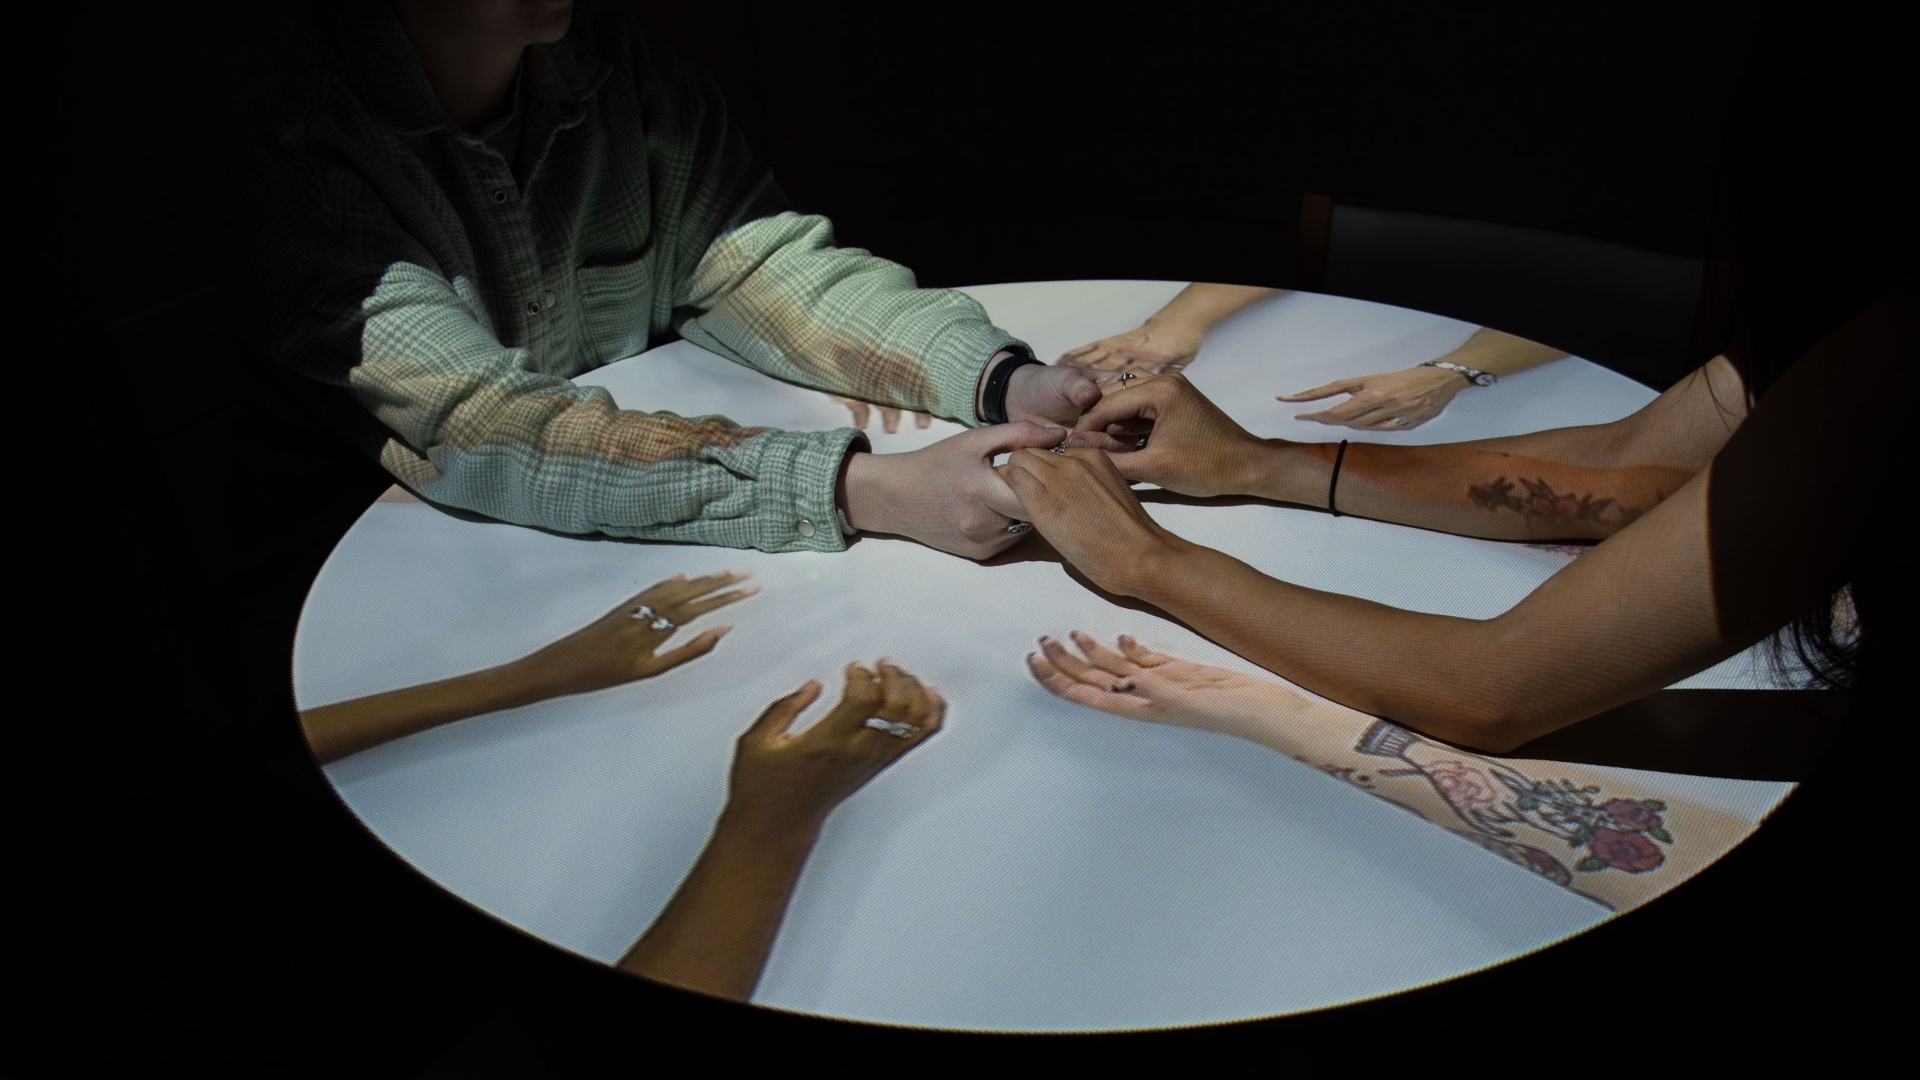 A video filmed and projected from above featured women relaying their lived experience through non-verbal communication.